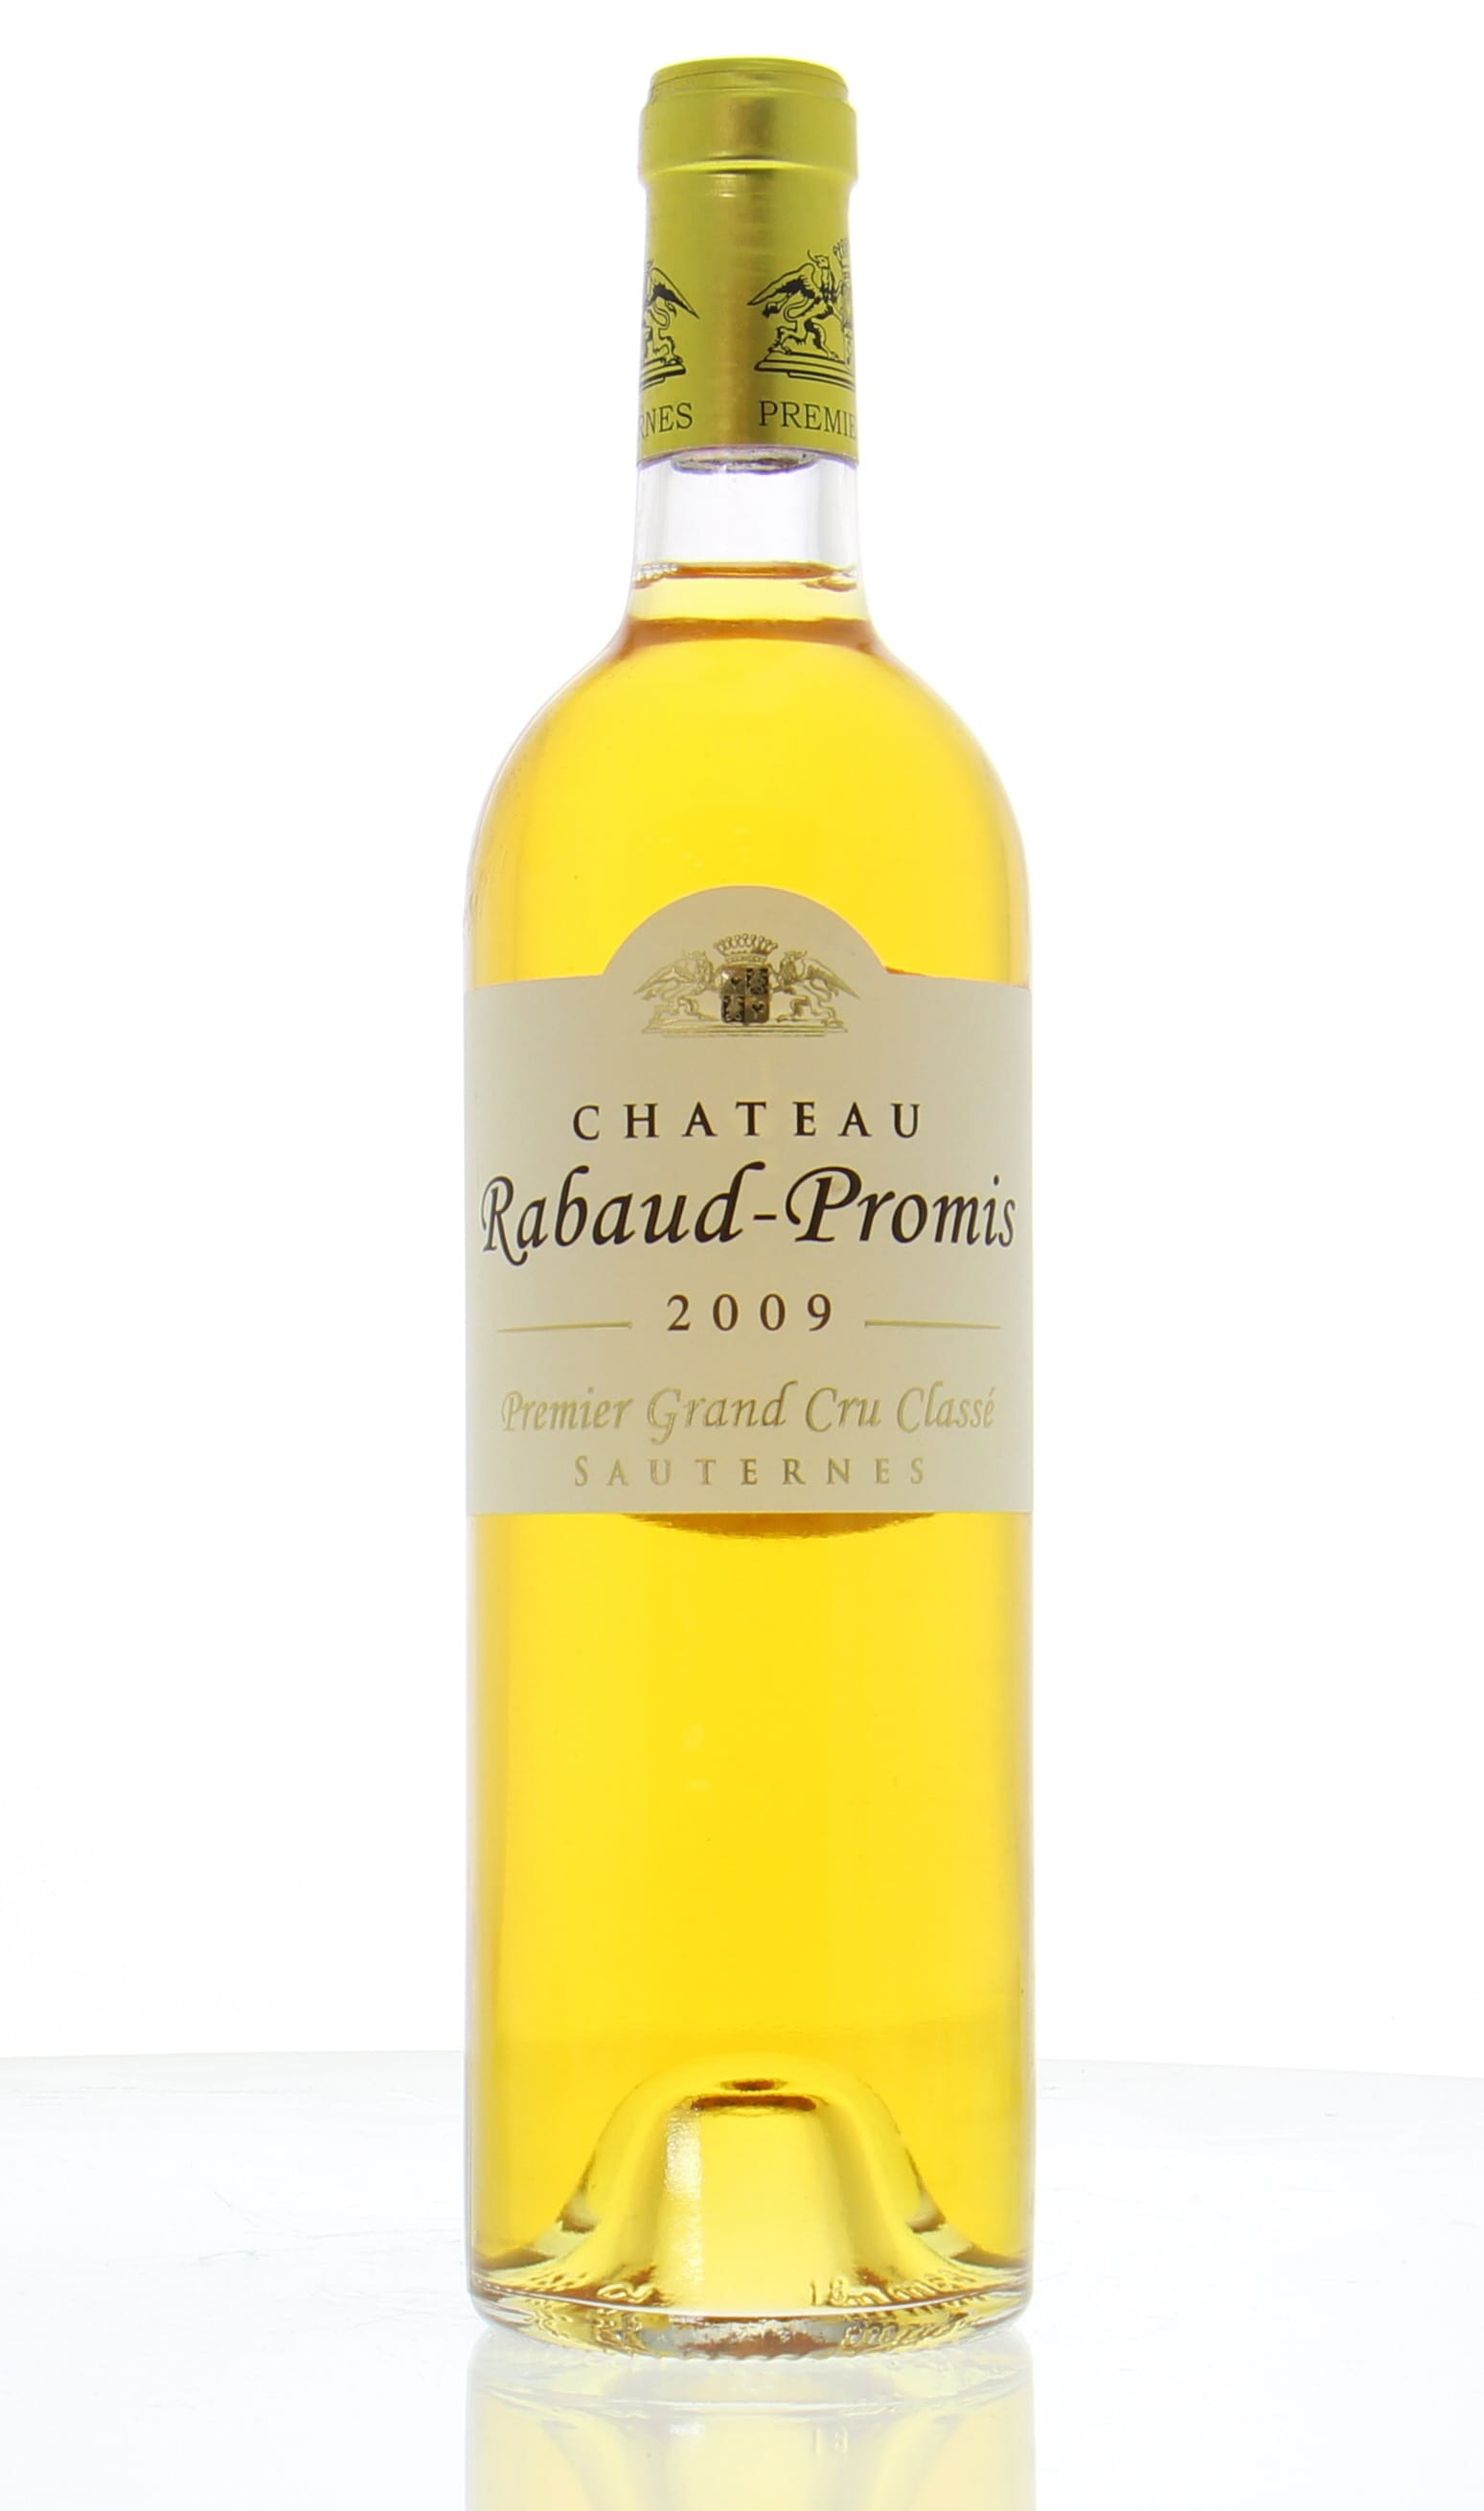 Chateau Rabaud-Promis - Chateau Rabaud-Promis 2009 From Original Wooden Case